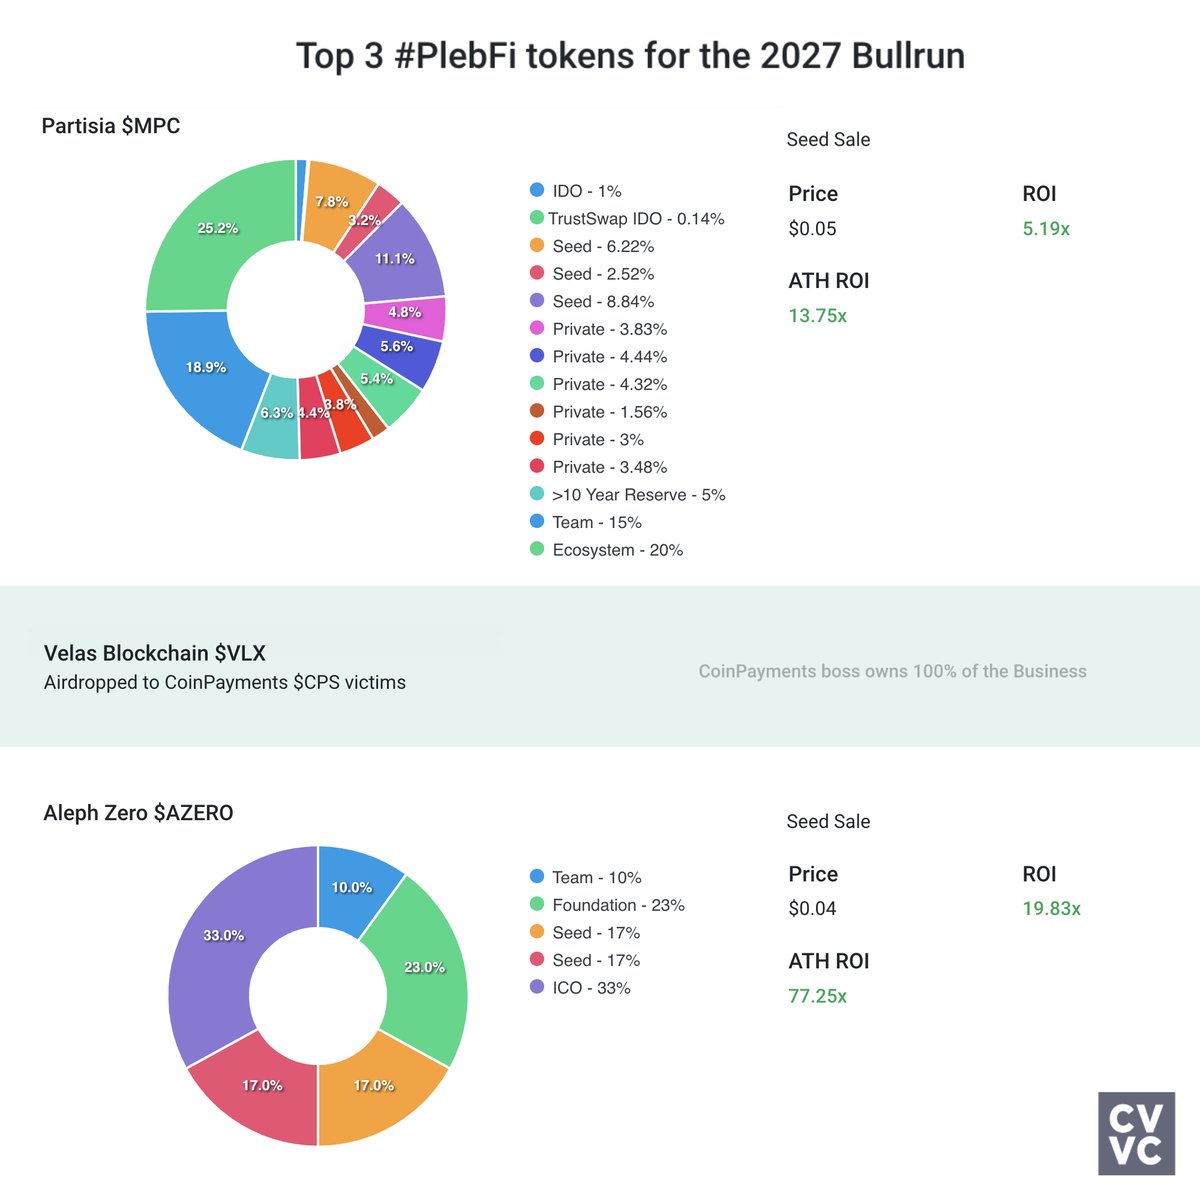 Top 3 #PlebFi tokens for the 2027 BullRun 

1 - Partisia $MPC
2 - Aleph Zero $AZERO
3 - Velas Blockchain $VLX 

People will say these are cash grabs, but these coins were approved by the Kazakhstan government and Swiss Crypto Valley VCs.

Stay tuned.

#Crypto #1000xgem #KuCoin